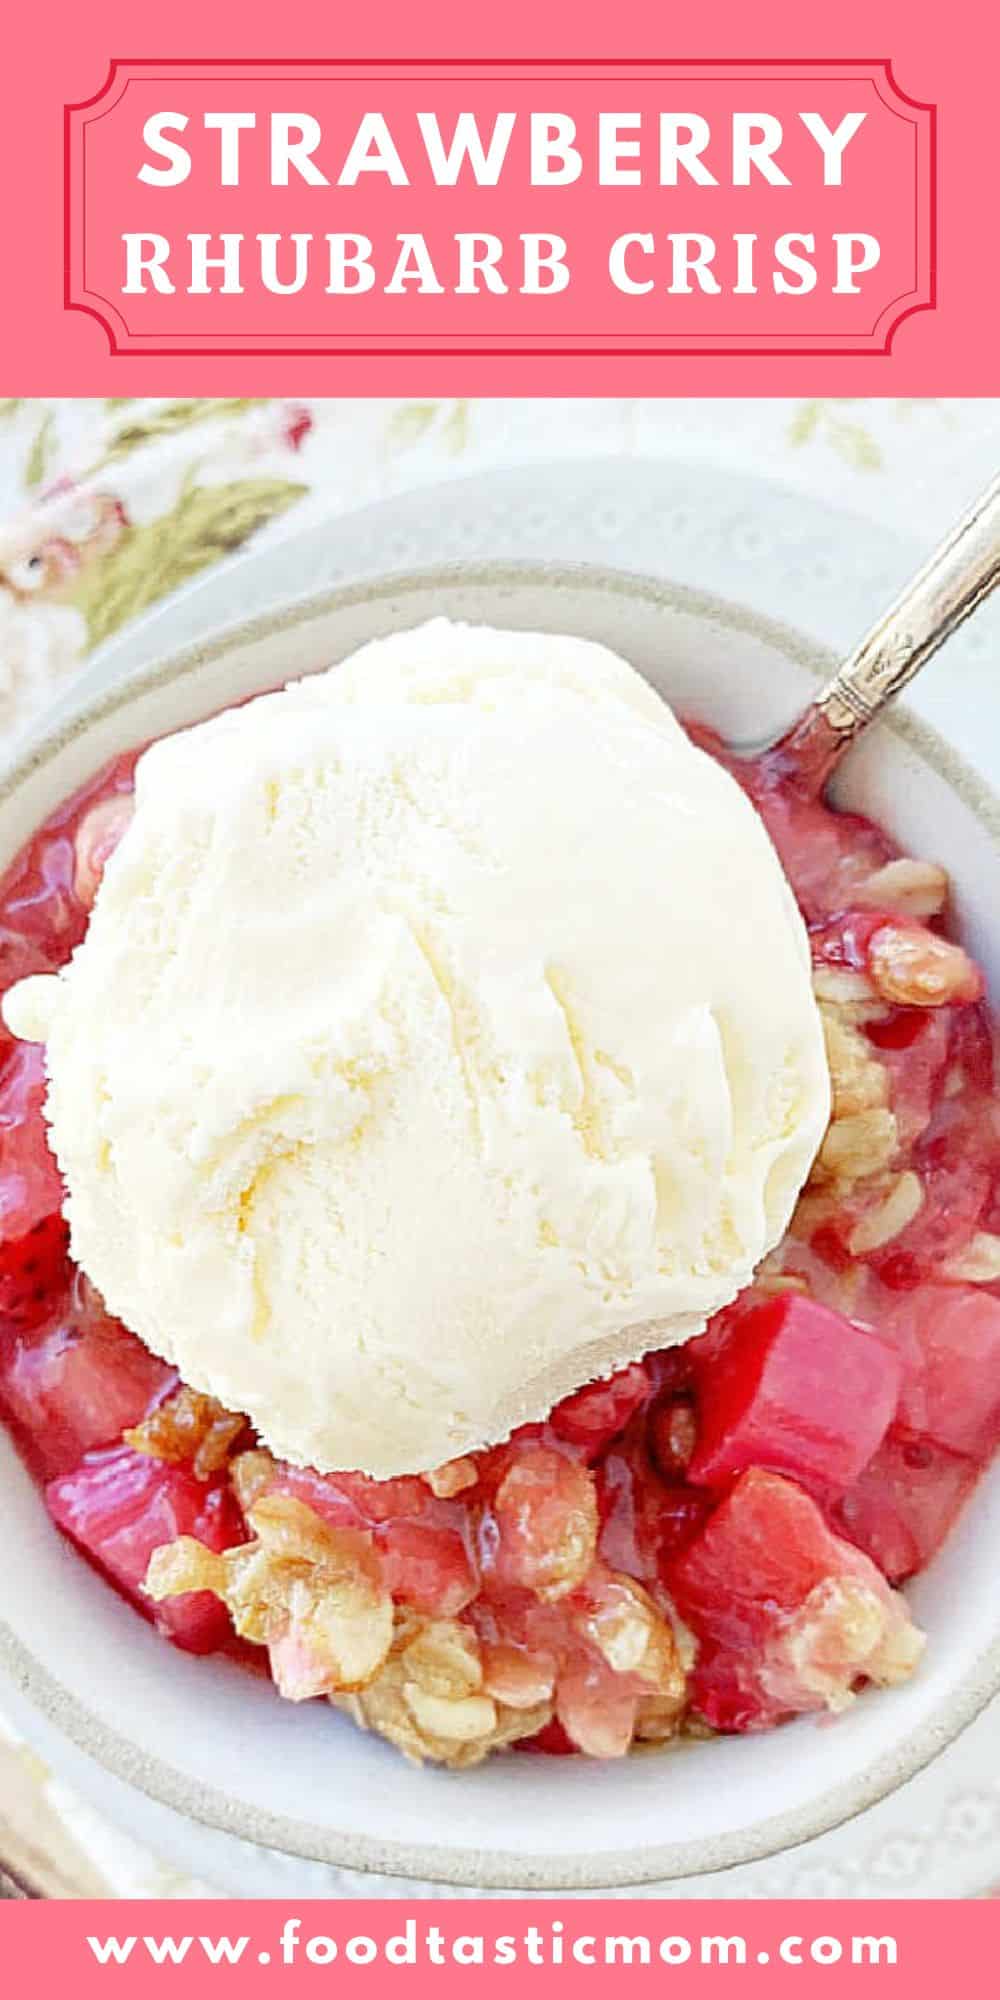 Sweet strawberries and tart rhubarb plus a buttery oat crumble topping equal this easy, old fashioned recipe for Strawberry Rhubarb Crisp. via @foodtasticmom